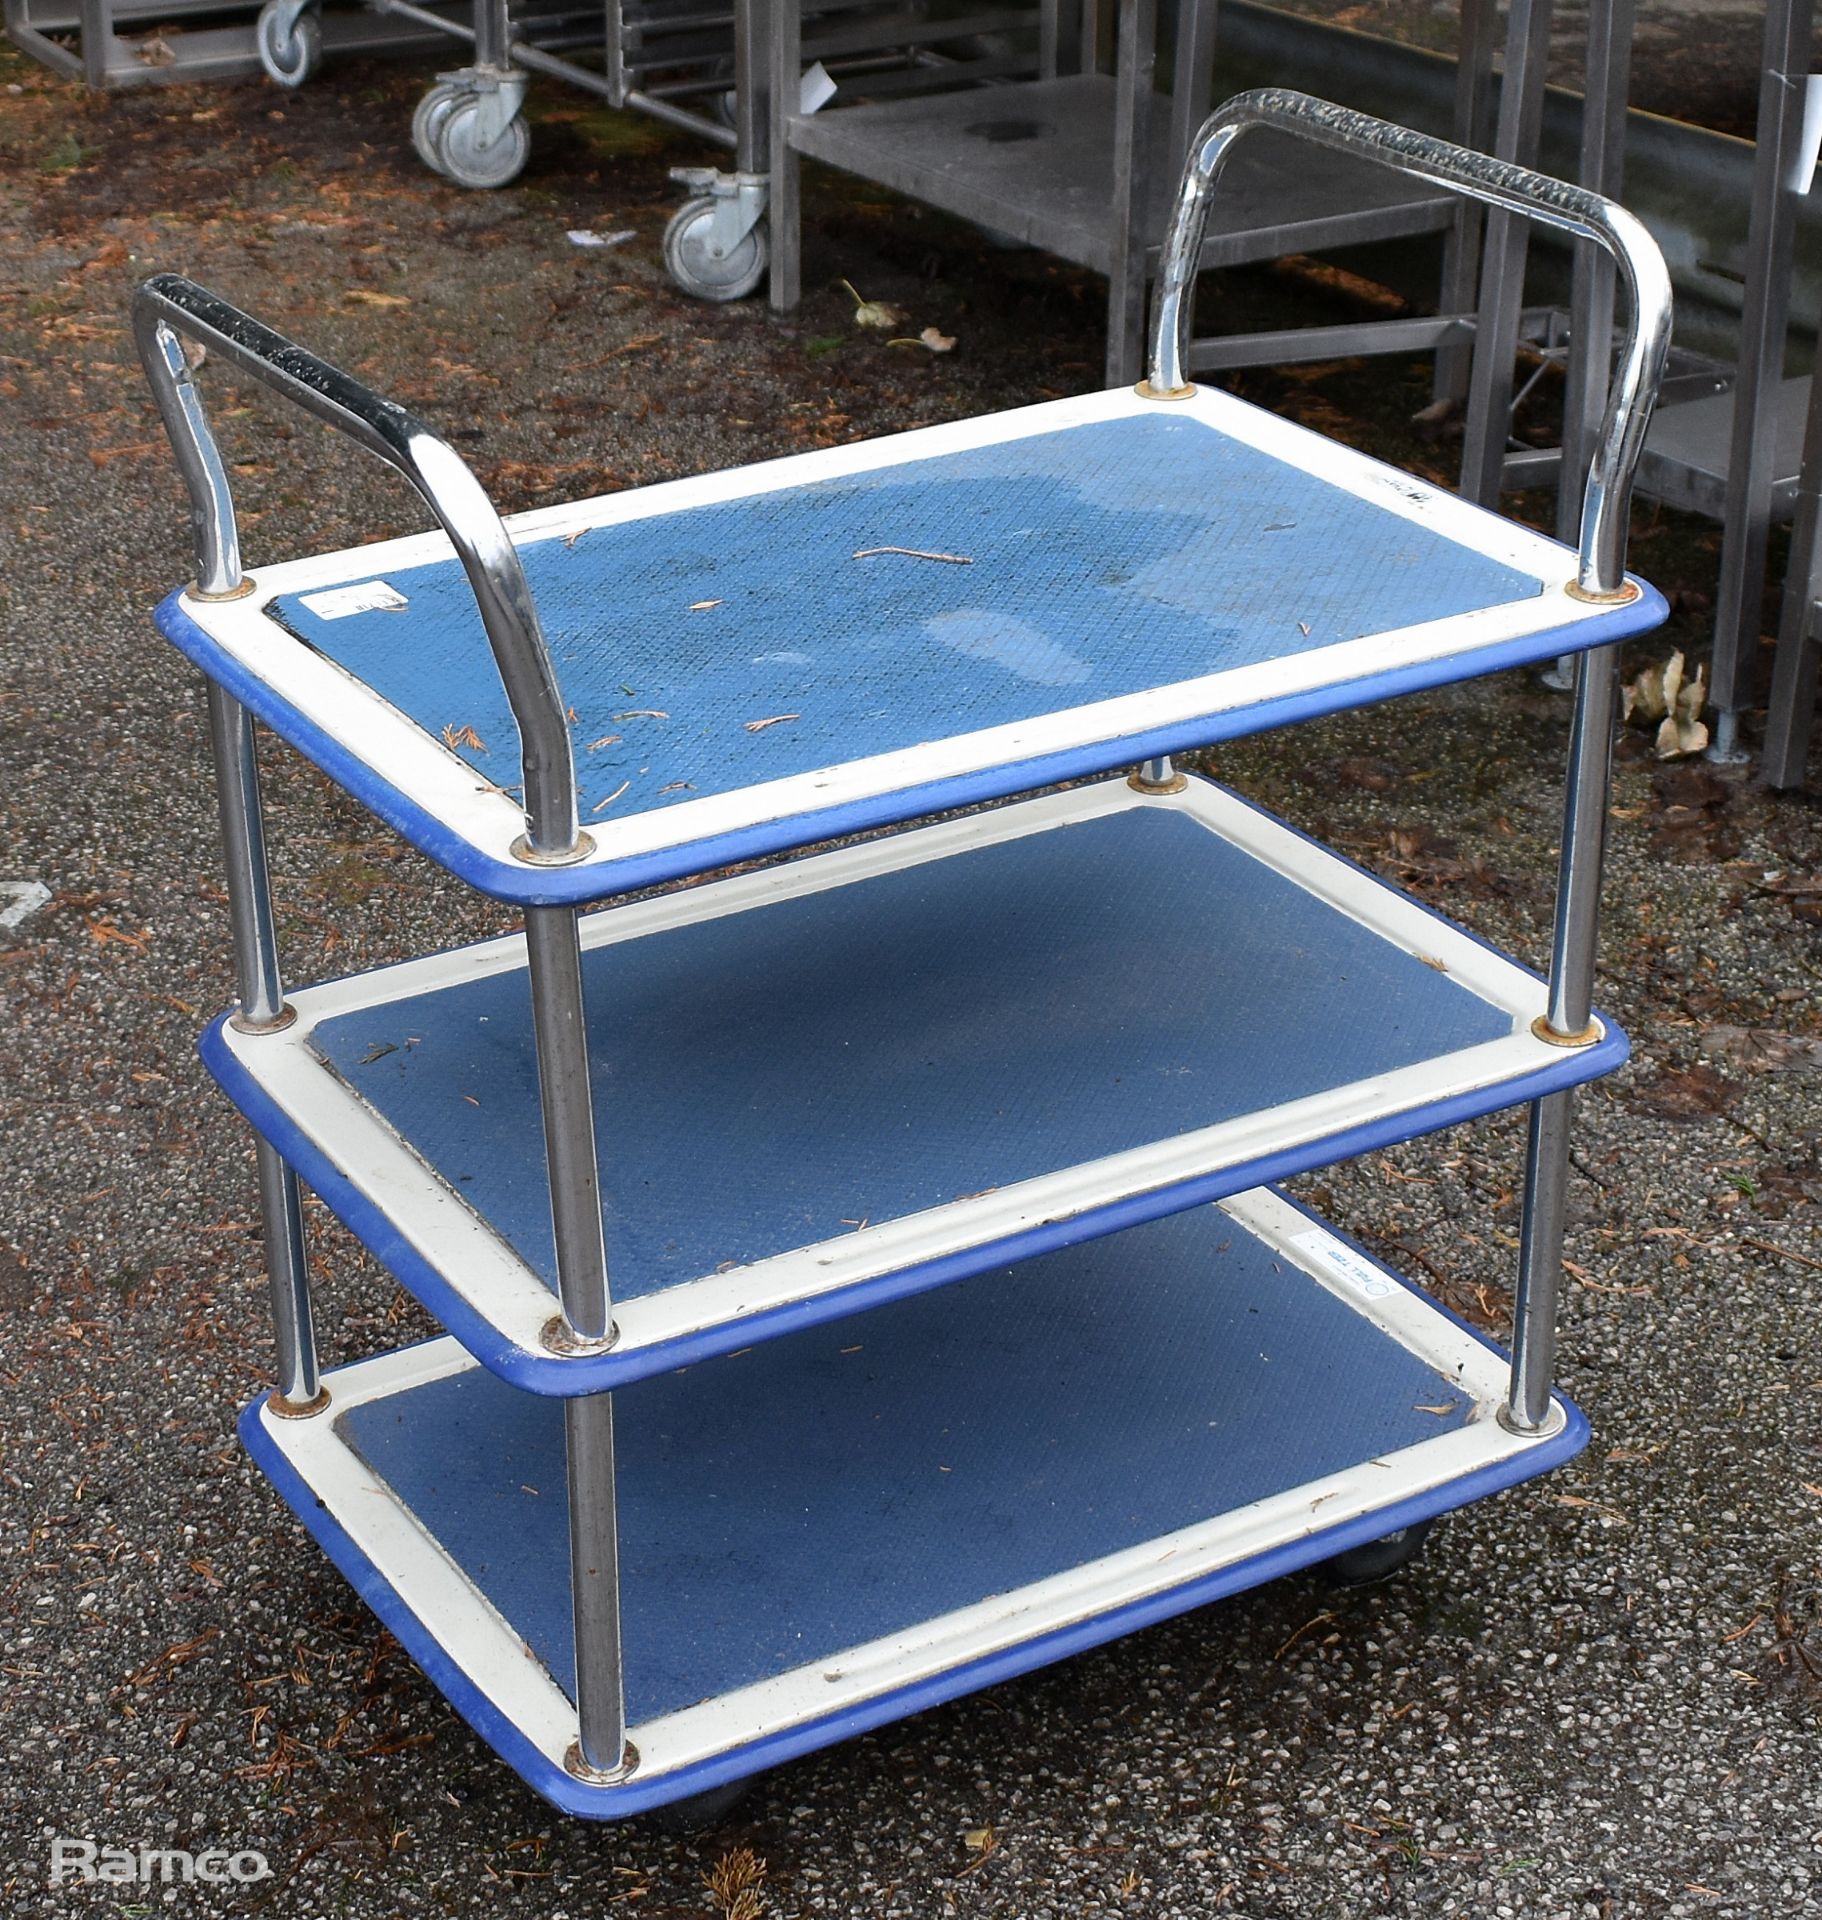 2x 3 shelf order picking trolley with metal handles - 74 x 48 x 90cm - Image 5 of 5